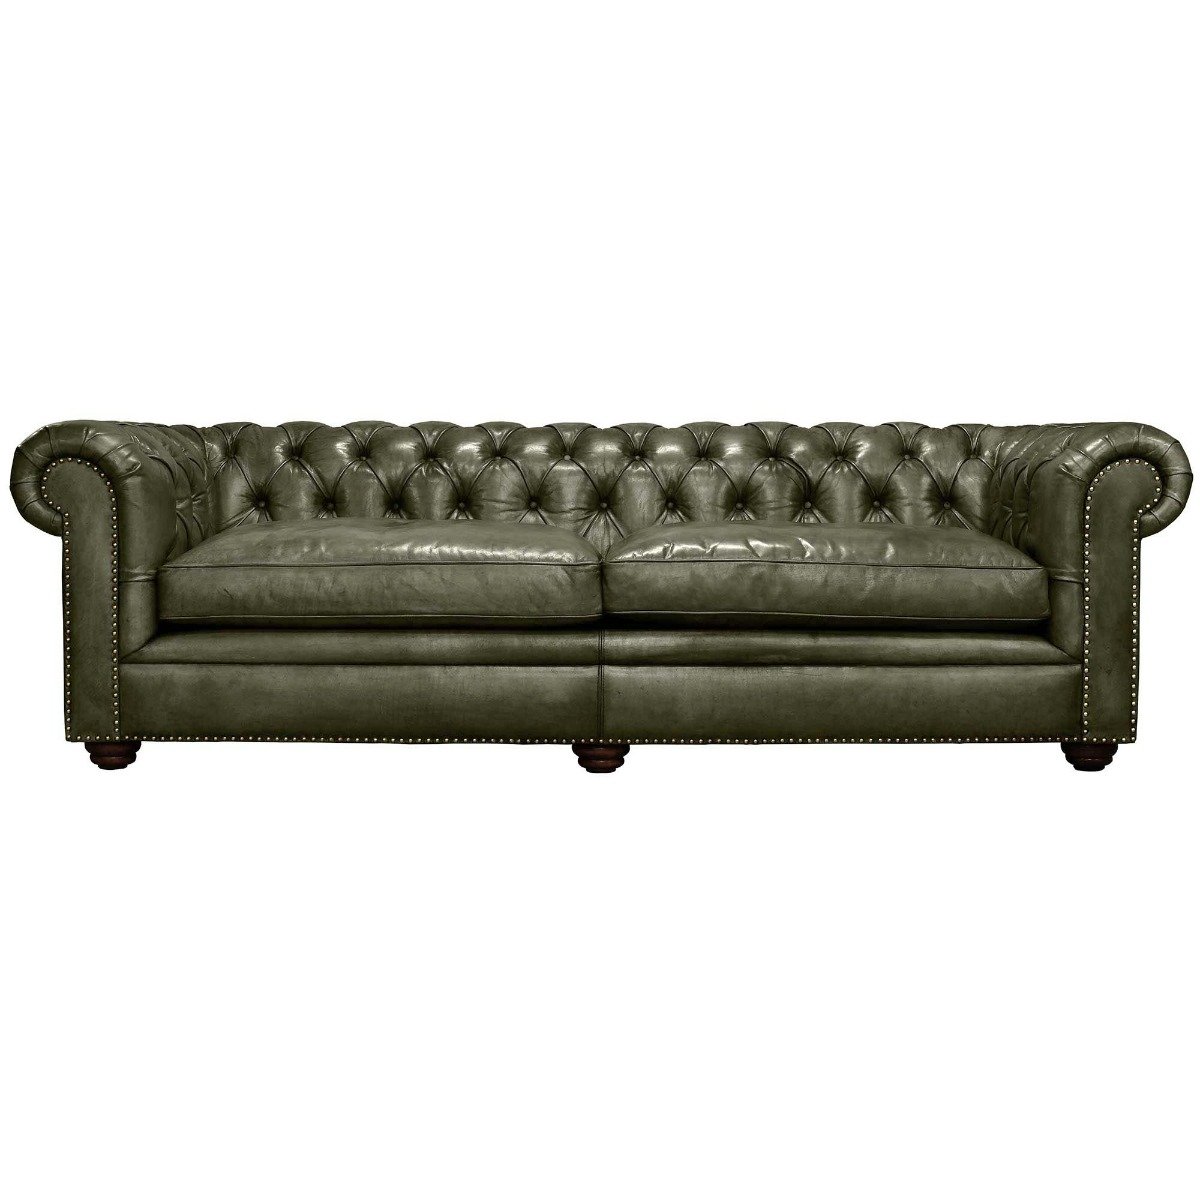 Pure Furniture Winslow Chesterfield Sofa 240cm With Wooden Legs, Green Leather | Barker & Stonehouse